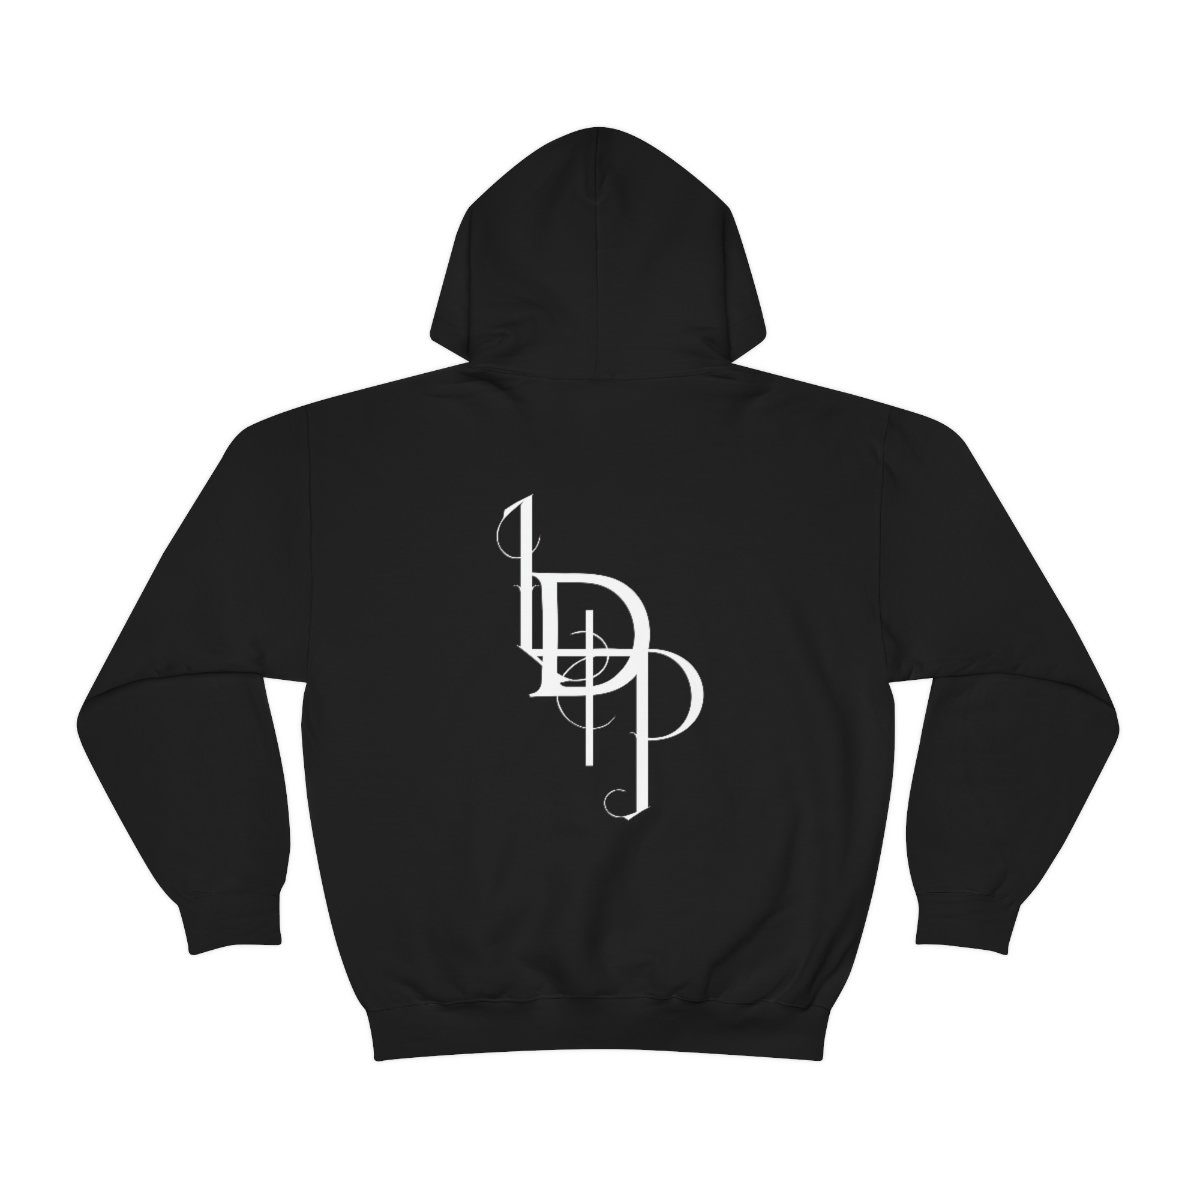 Let The Day Perish Logo Pullover Hooded Sweatshirt